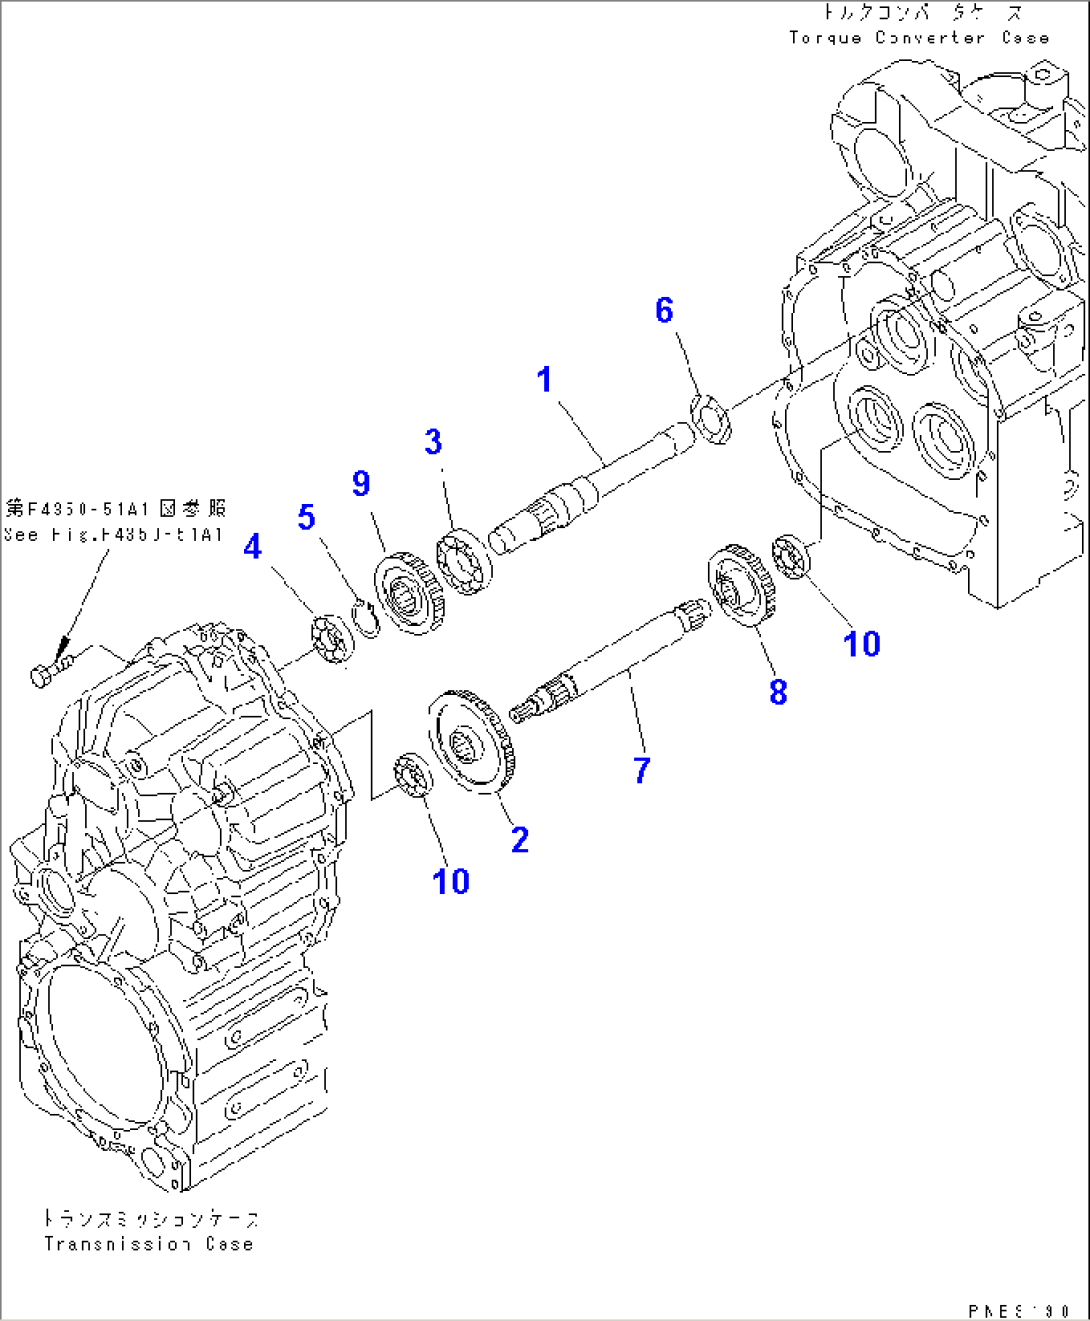 TRANSMISSION (INPUT SHAFT AND 3RD AND 4TH GEAR)